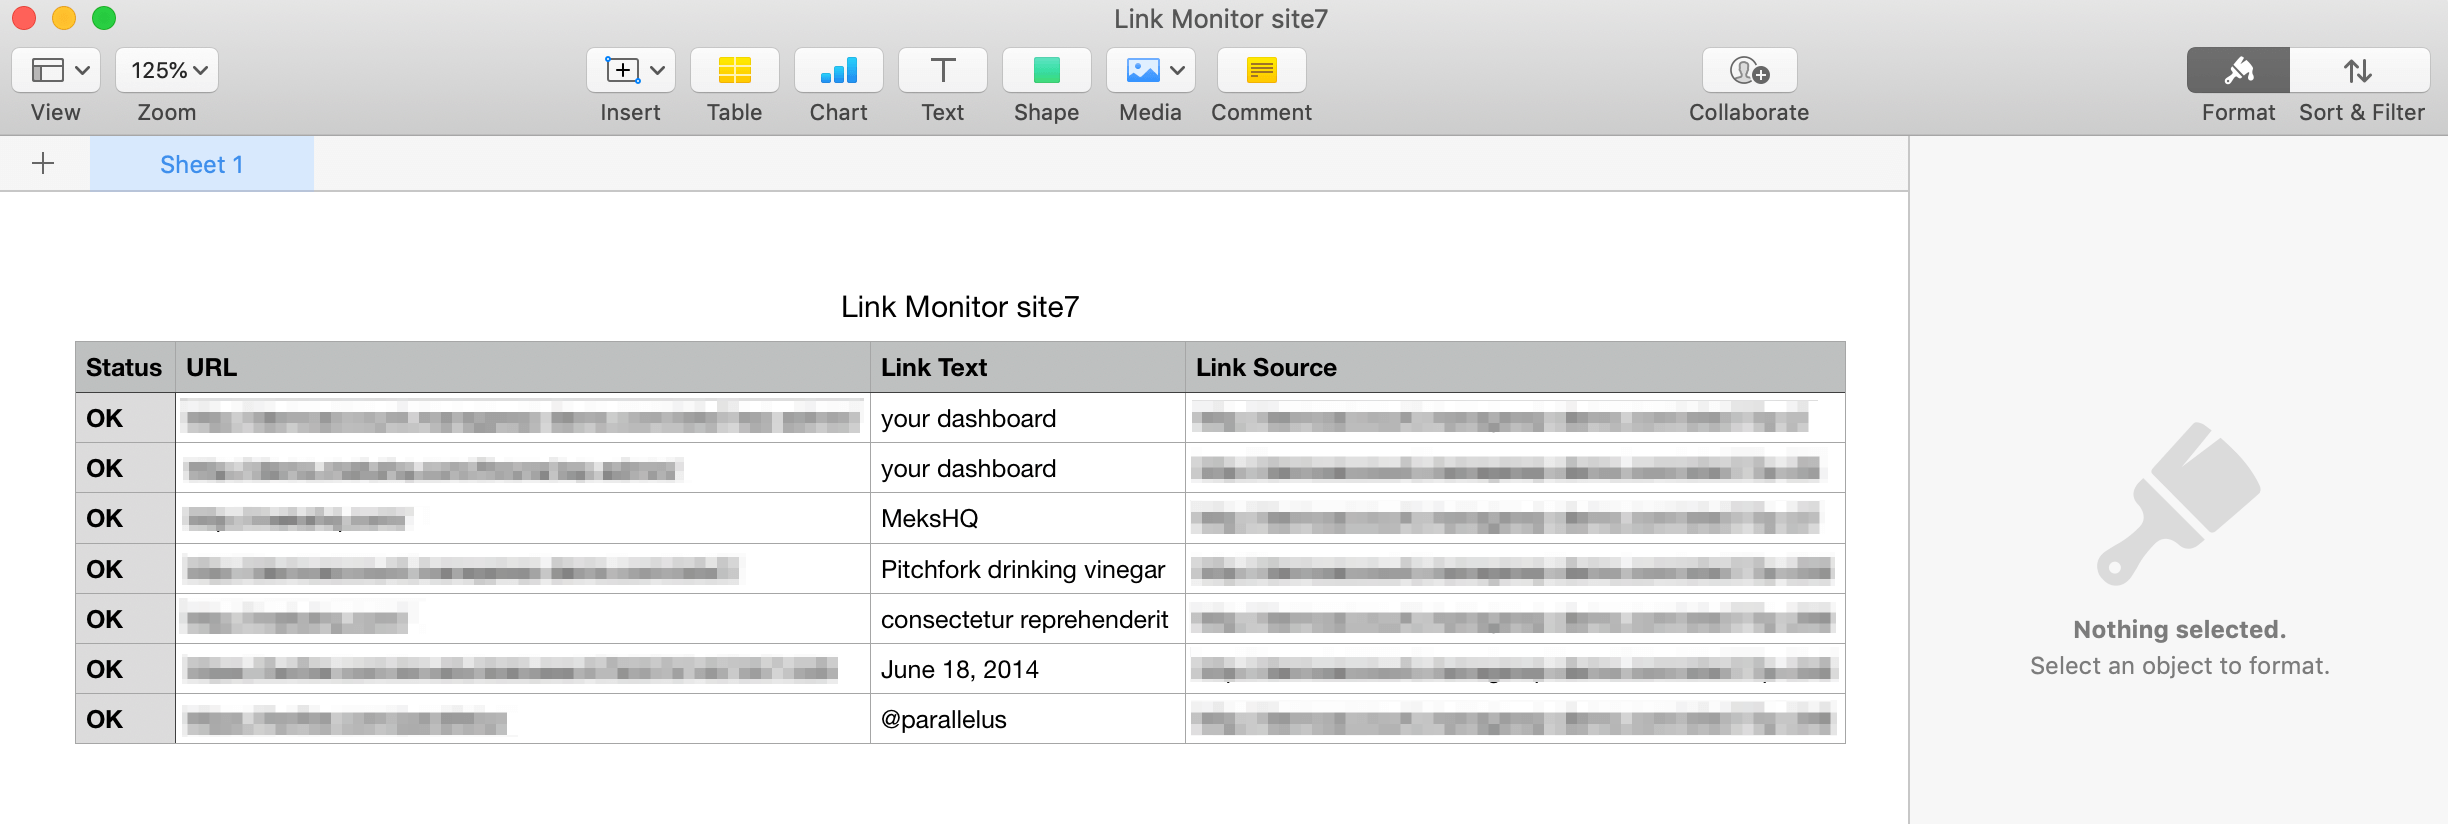 An example of a CSV file created with the ManageWP Link Monitor.